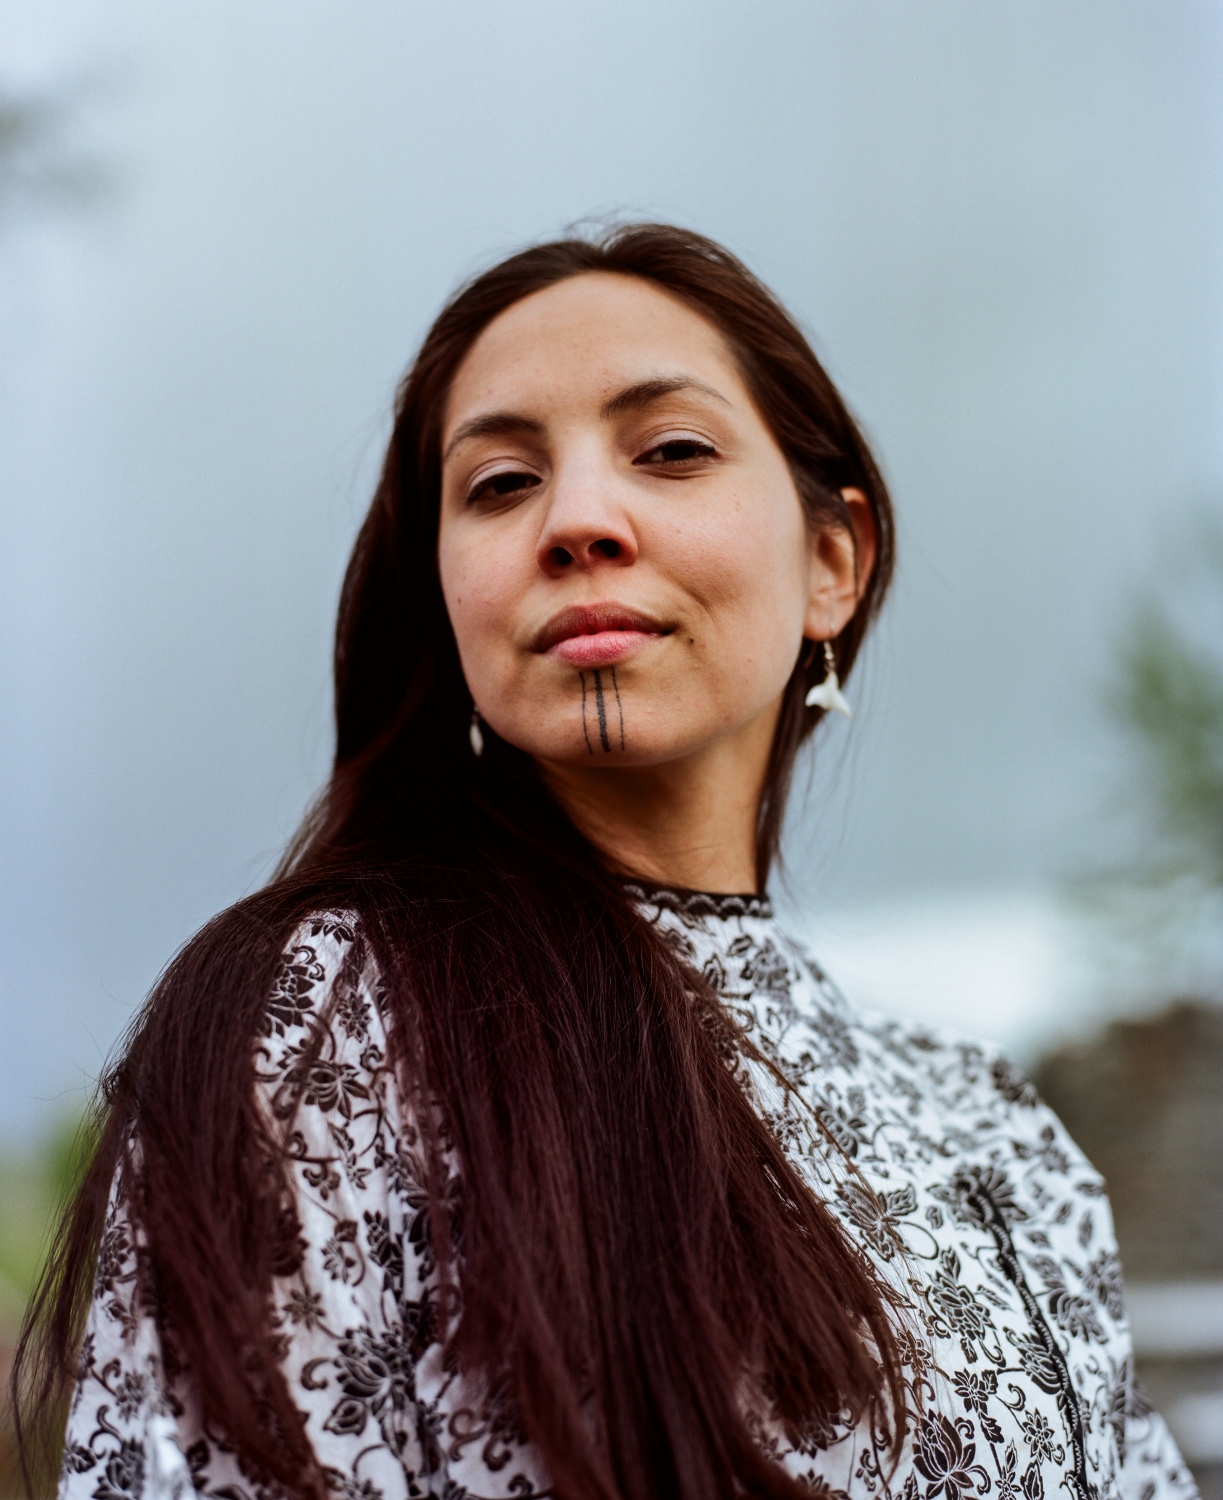  Denise Pollock, 28, who goes by her Inupiaq name Annauk, is an Inupiaq language teacher in addition to being the Climate Change Research and Policy Institue Director at the Alaska Center for Justice. Pollock says that there was a connection between getting her chin tattoo and speaking her language.&nbsp; &ldquo;For me, one of the reasons why I chose to get my tavlagun was as a reminder for me to continue speaking, teaching, and learning the Inupiaq language. For me, it was about accountability. Whenever I look in the mirror, I know I need to speak my language,&quot; she says.&nbsp; Pollock also is an Inupiaq language apprentice, which involves meeting with an Inupiaq language mentor three times a week and studying and listening to Inupiaq ten to fifteen hours per week.&nbsp; &quot;Part of the reason I got mine at the time I did is that I went home to Shishmaref&mdash;I didn&rsquo;t grow up in Shishmaref. I lived in Utqiagvik, Fairbanks, and Massachusettes for most of my life. I ended up taking a job back here in Anchorage in 2015 to work on climate adaptation with my community and other communities facing the same issue, and I ended up getting my tavlugun after going home. I&rsquo;ve grown up going home my whole life regardless of where I lived, but for me it was really important because I was at a point in my life where I was giving back to Shishmaref and I had something to offer my community. Last summer, I went back home to Shishmaref and hosted a series of meetings related to climate adaptation, installed community-based erosion montoring, and I was also able to be out in the land with my family. I think one of my most precious moments was seeing my community acknowledge that I can speak in our dialect. And I could feel that connection&mdash;I could feel the power.&rdquo; 